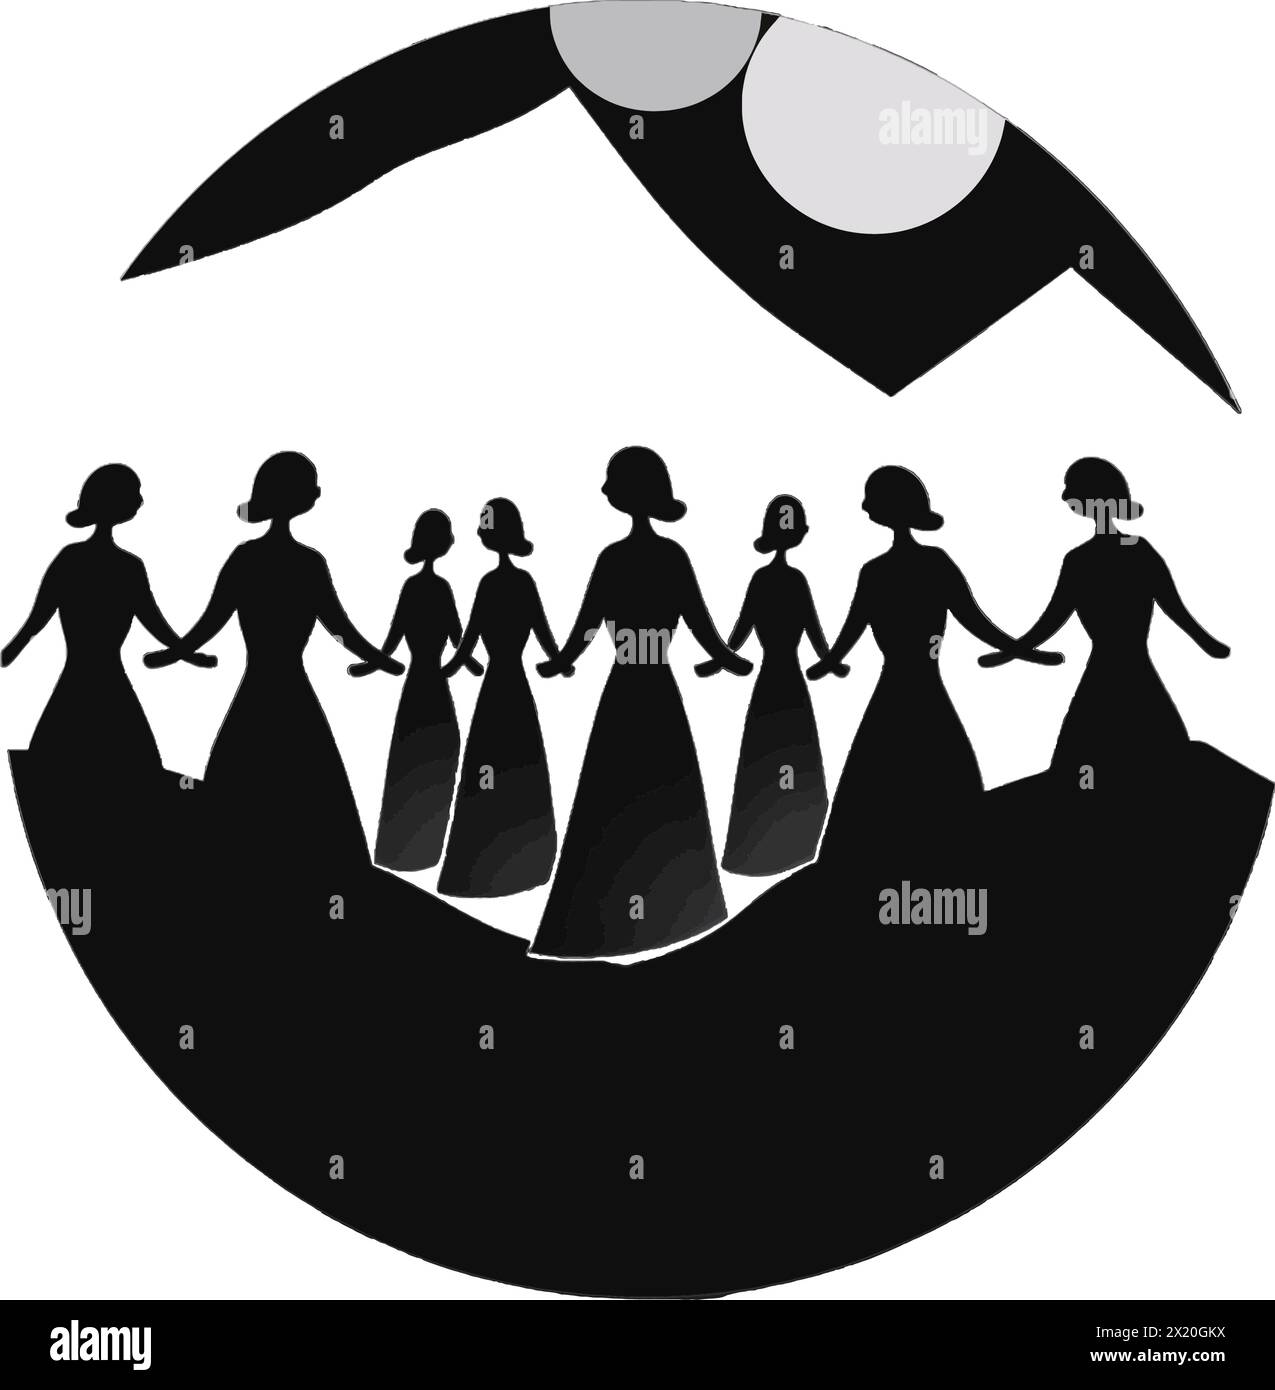 Vector illustration of a people in a circle in black silhouette against a clean white background, capturing graceful forms of this vector. Stock Vector